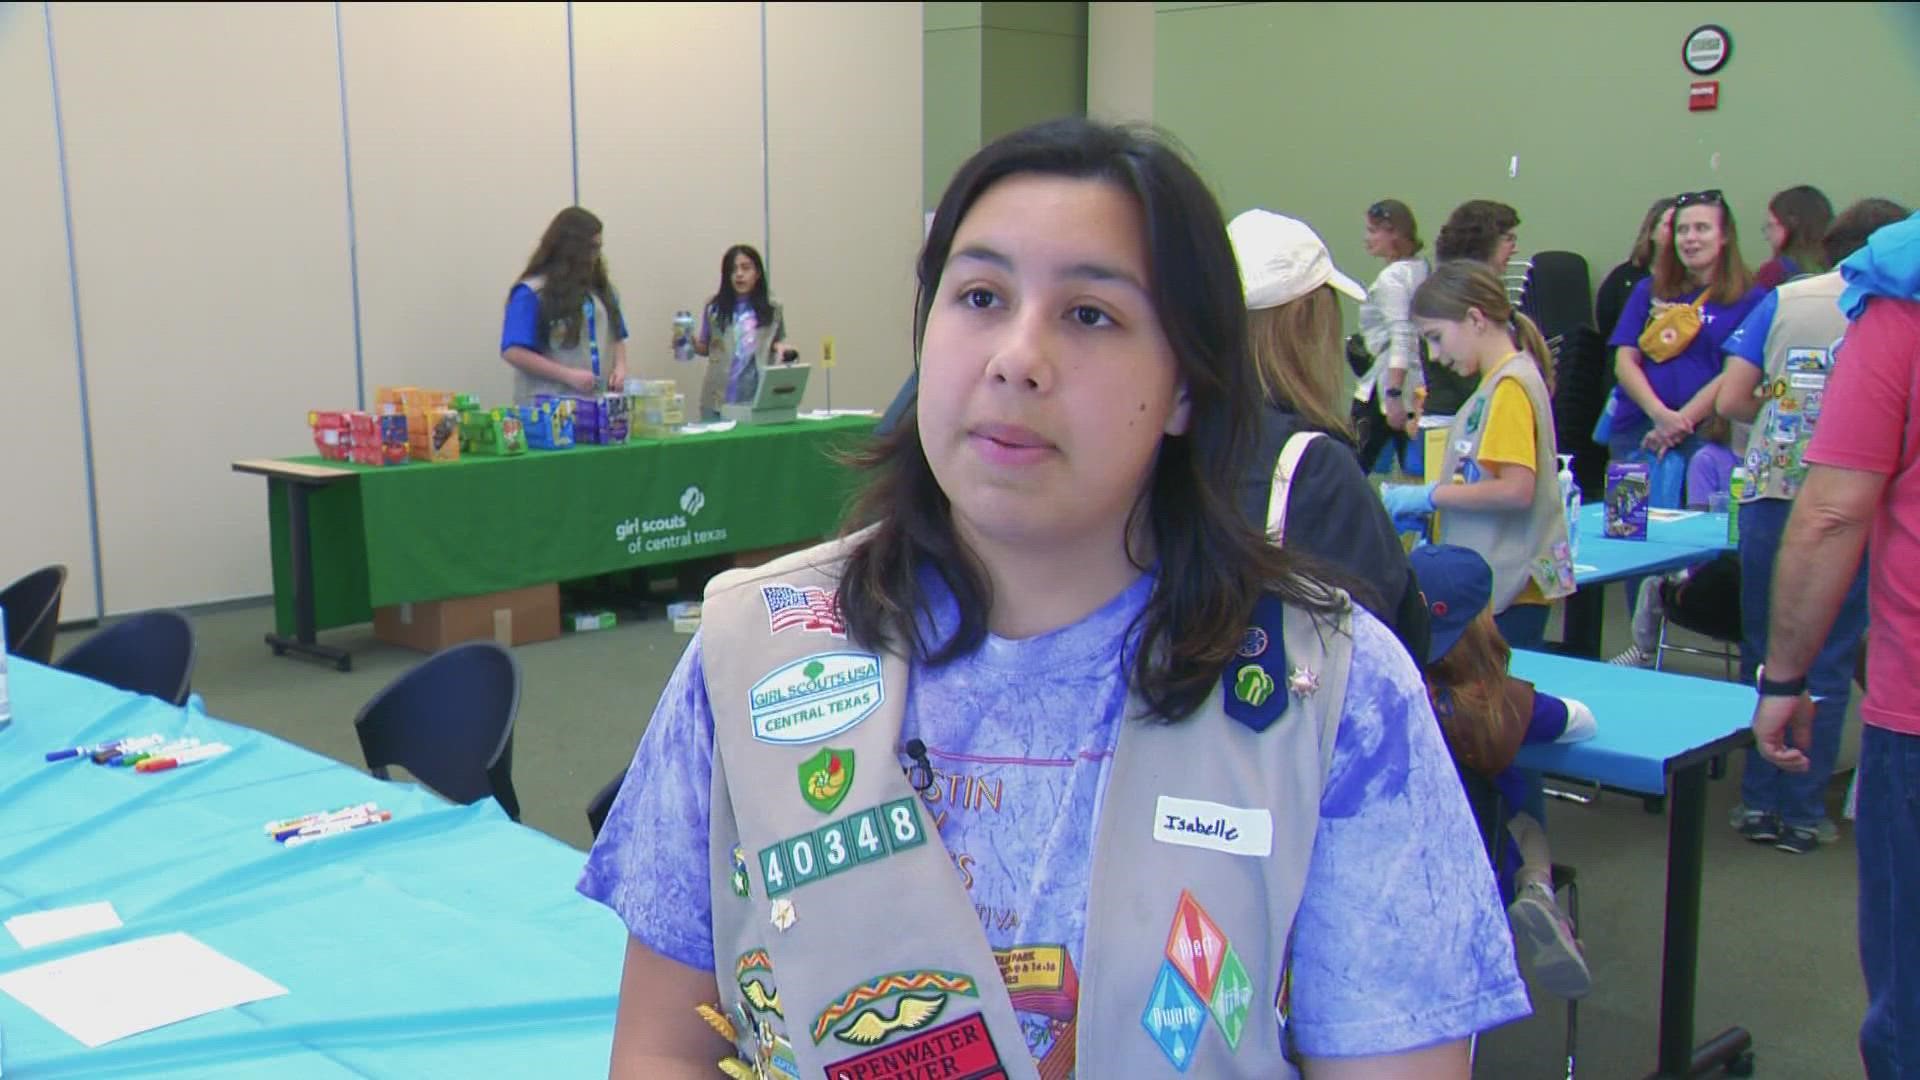 Girl Scouts of Central Texas and Wells Fargo spent the day showing the scouts business skills and how to set goals.